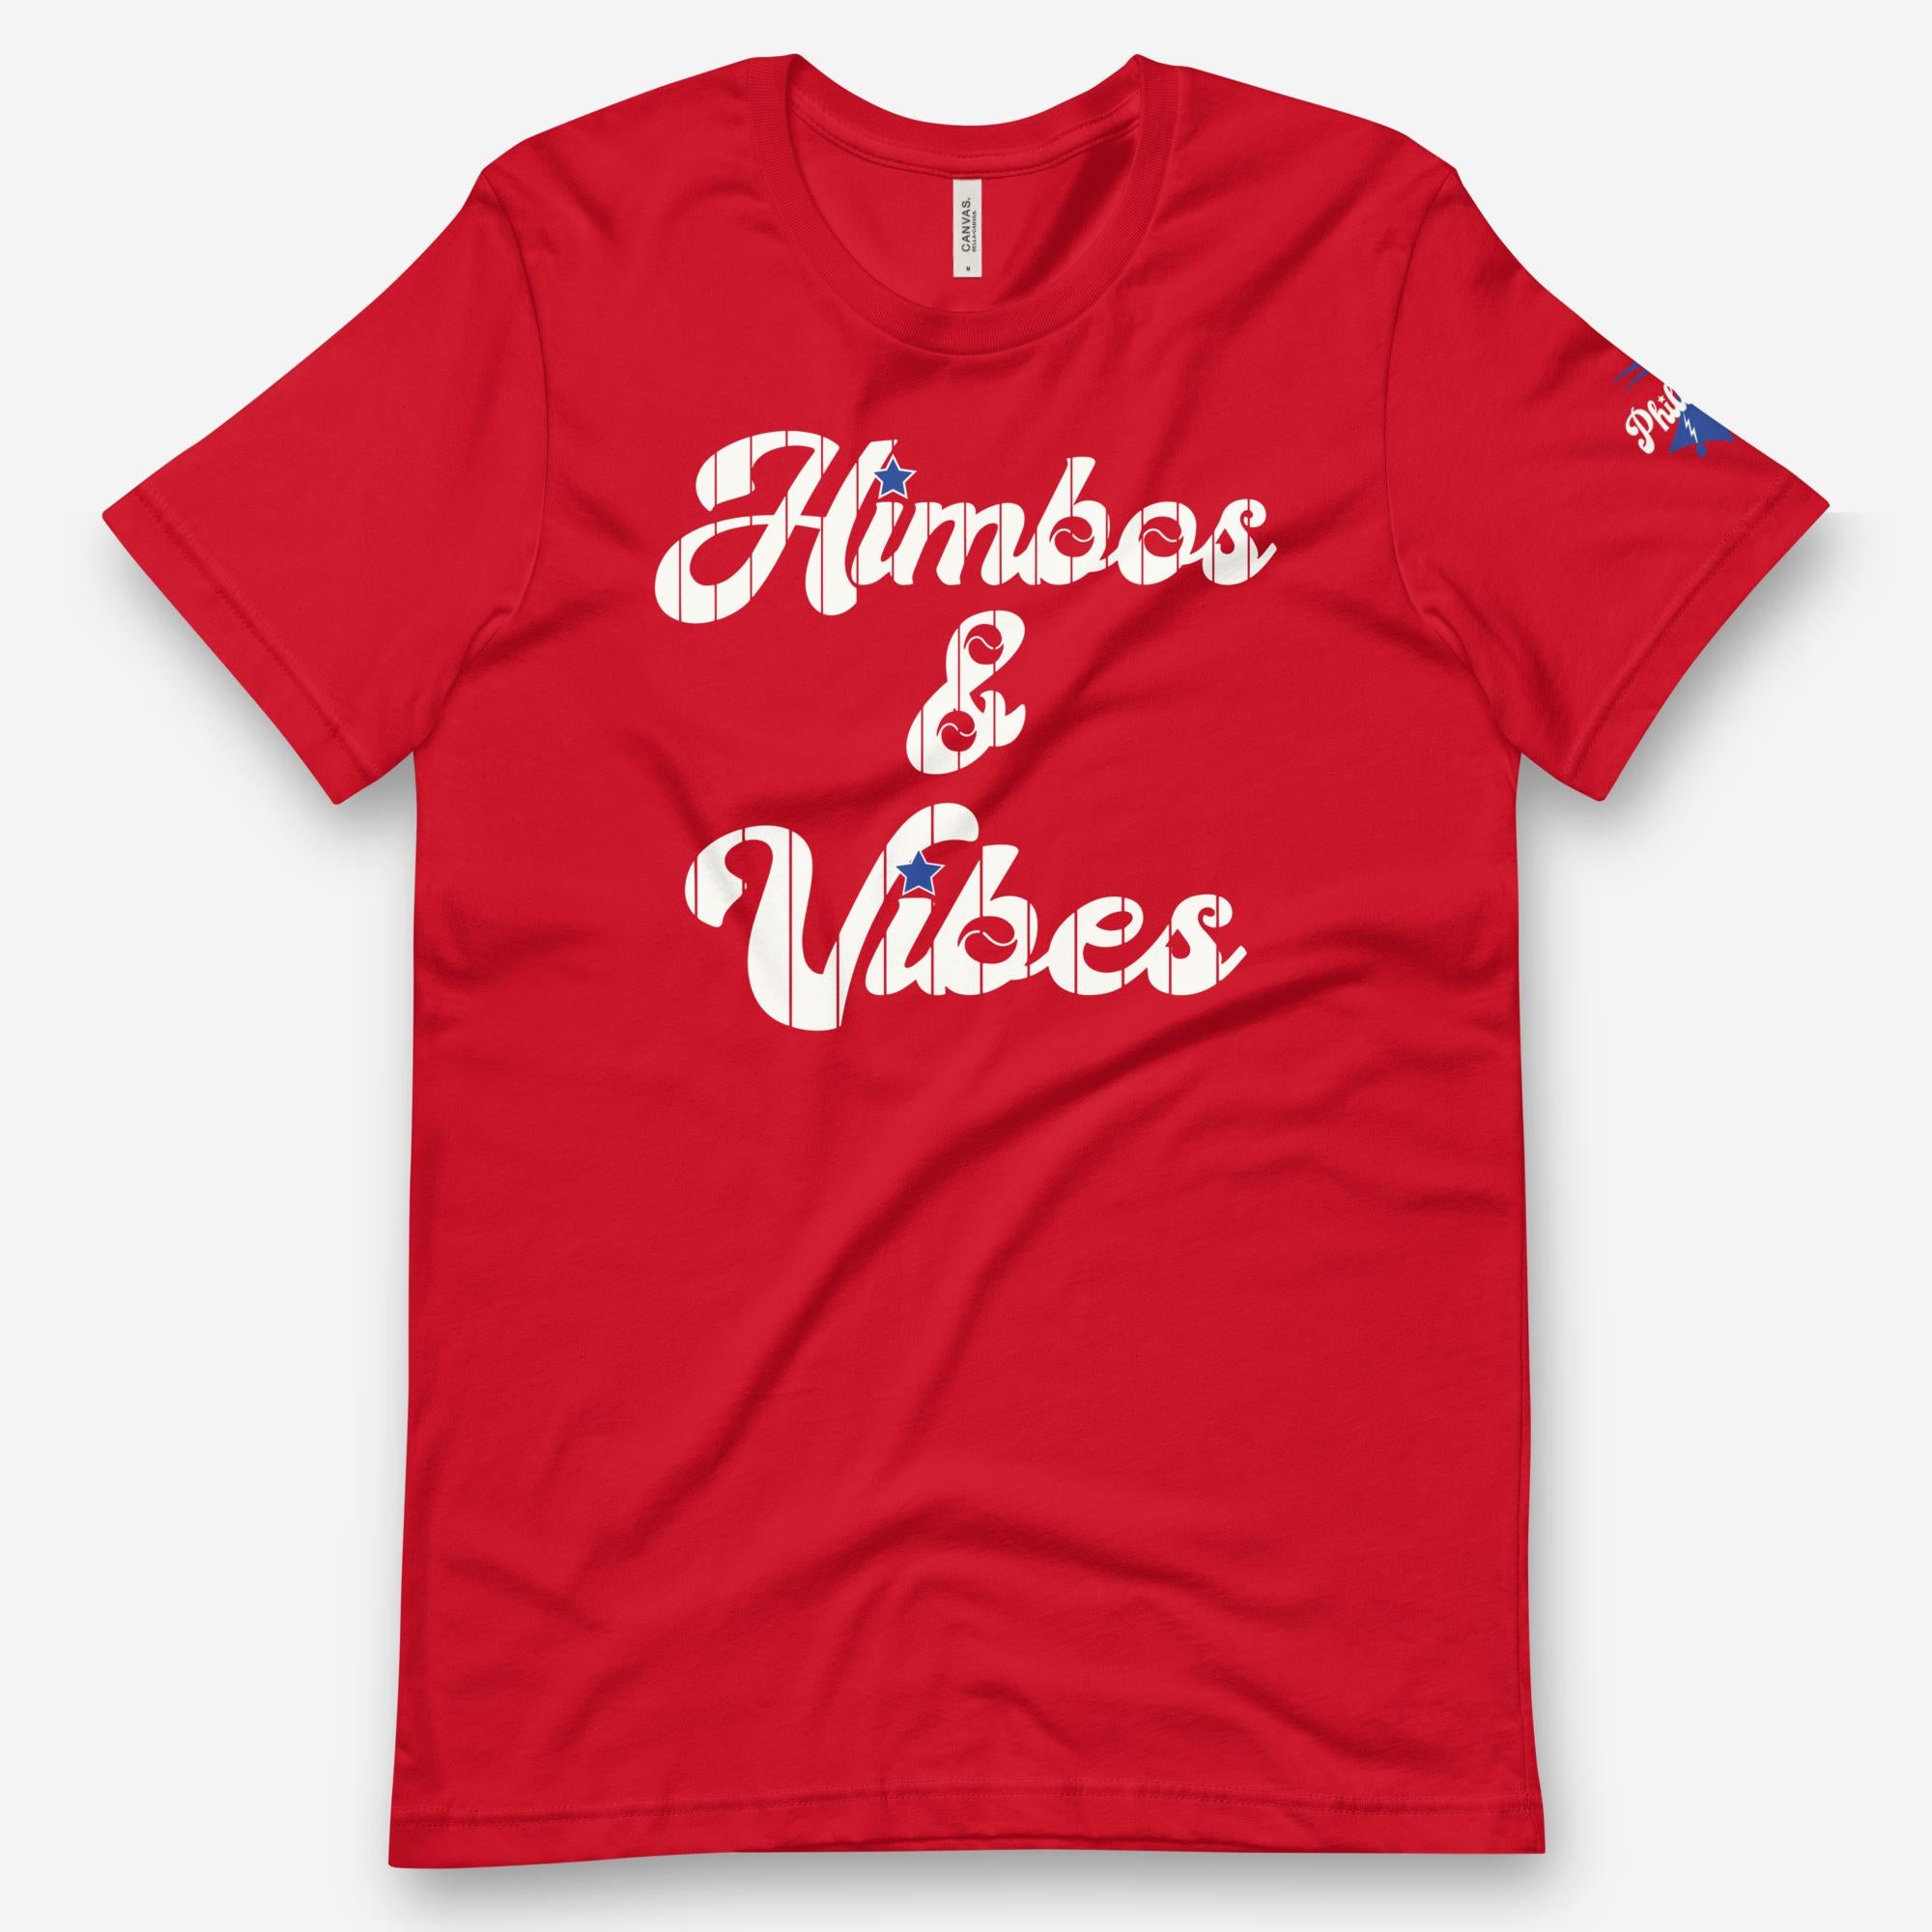 "Himbos & Vibes" Tee